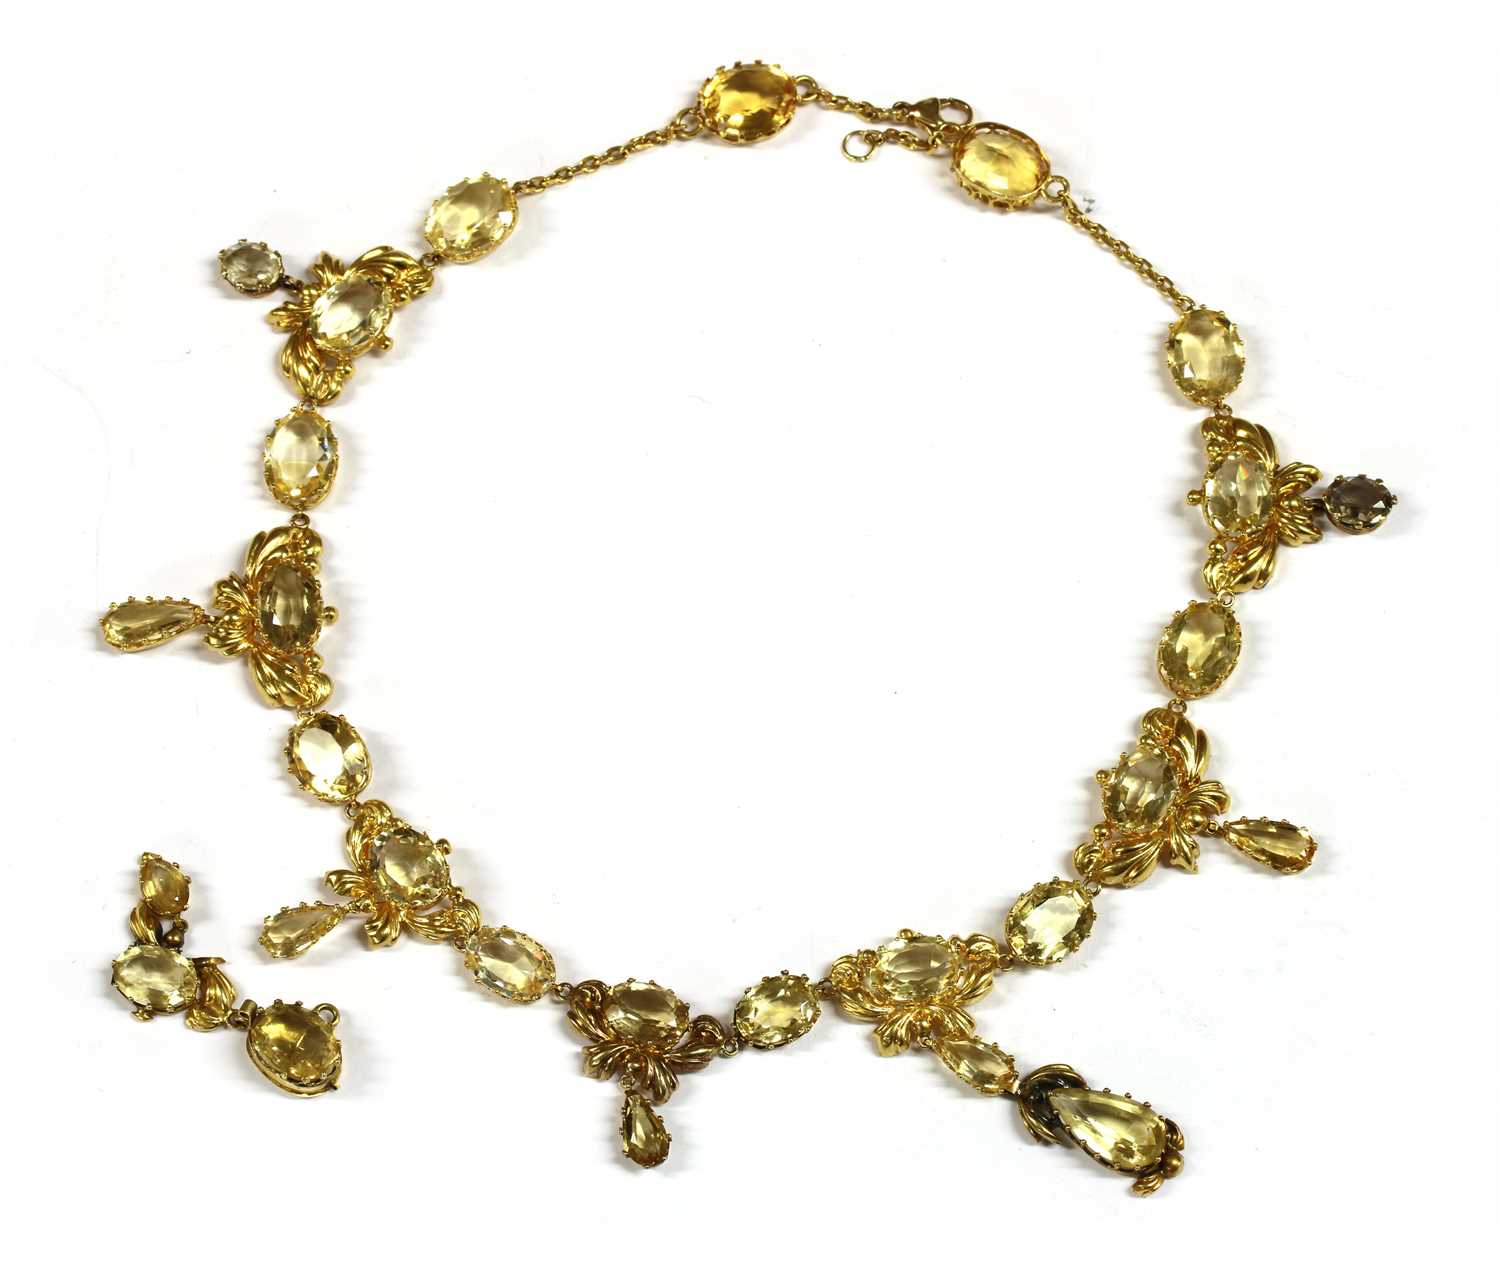 Lot 6 - An early Victorian gold and citrine necklace, c.1840